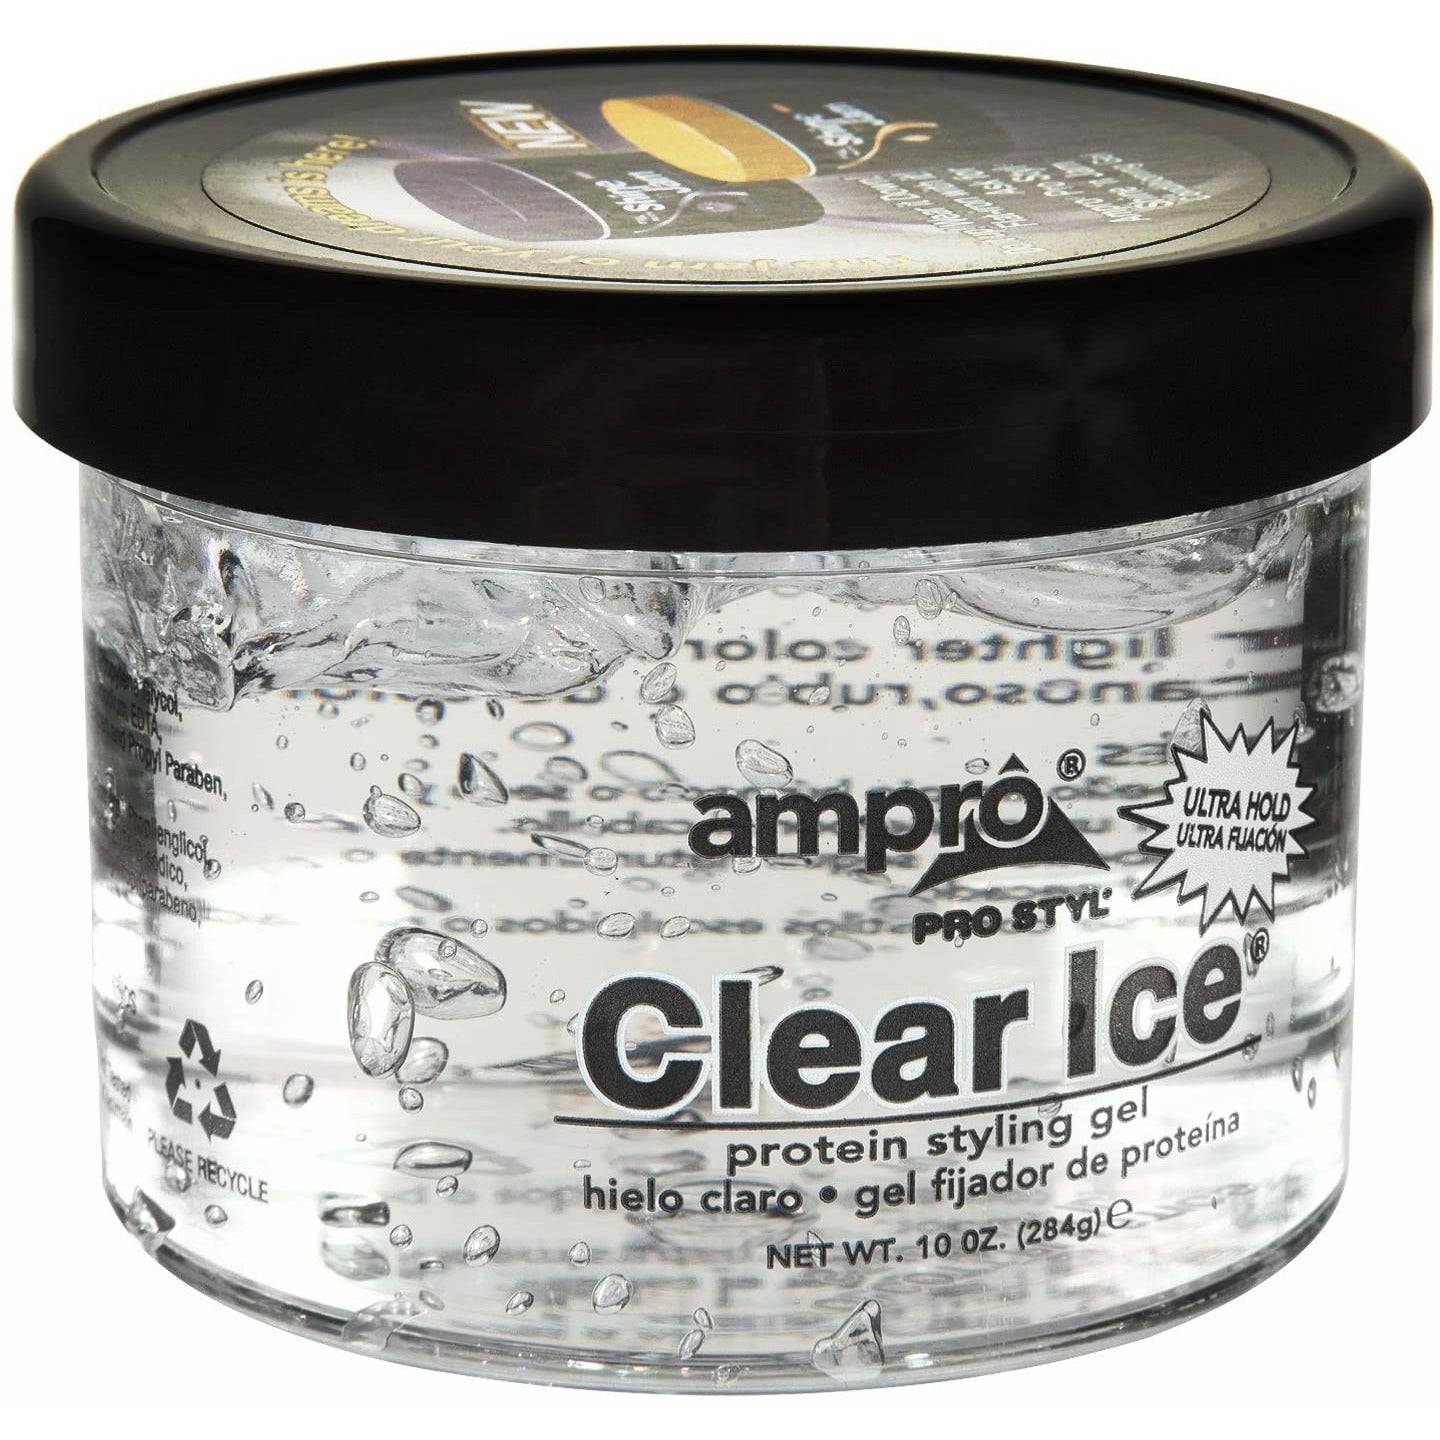 Ampro Pro Styl Clear Ice Protein Styling Gel - VIP Extensions